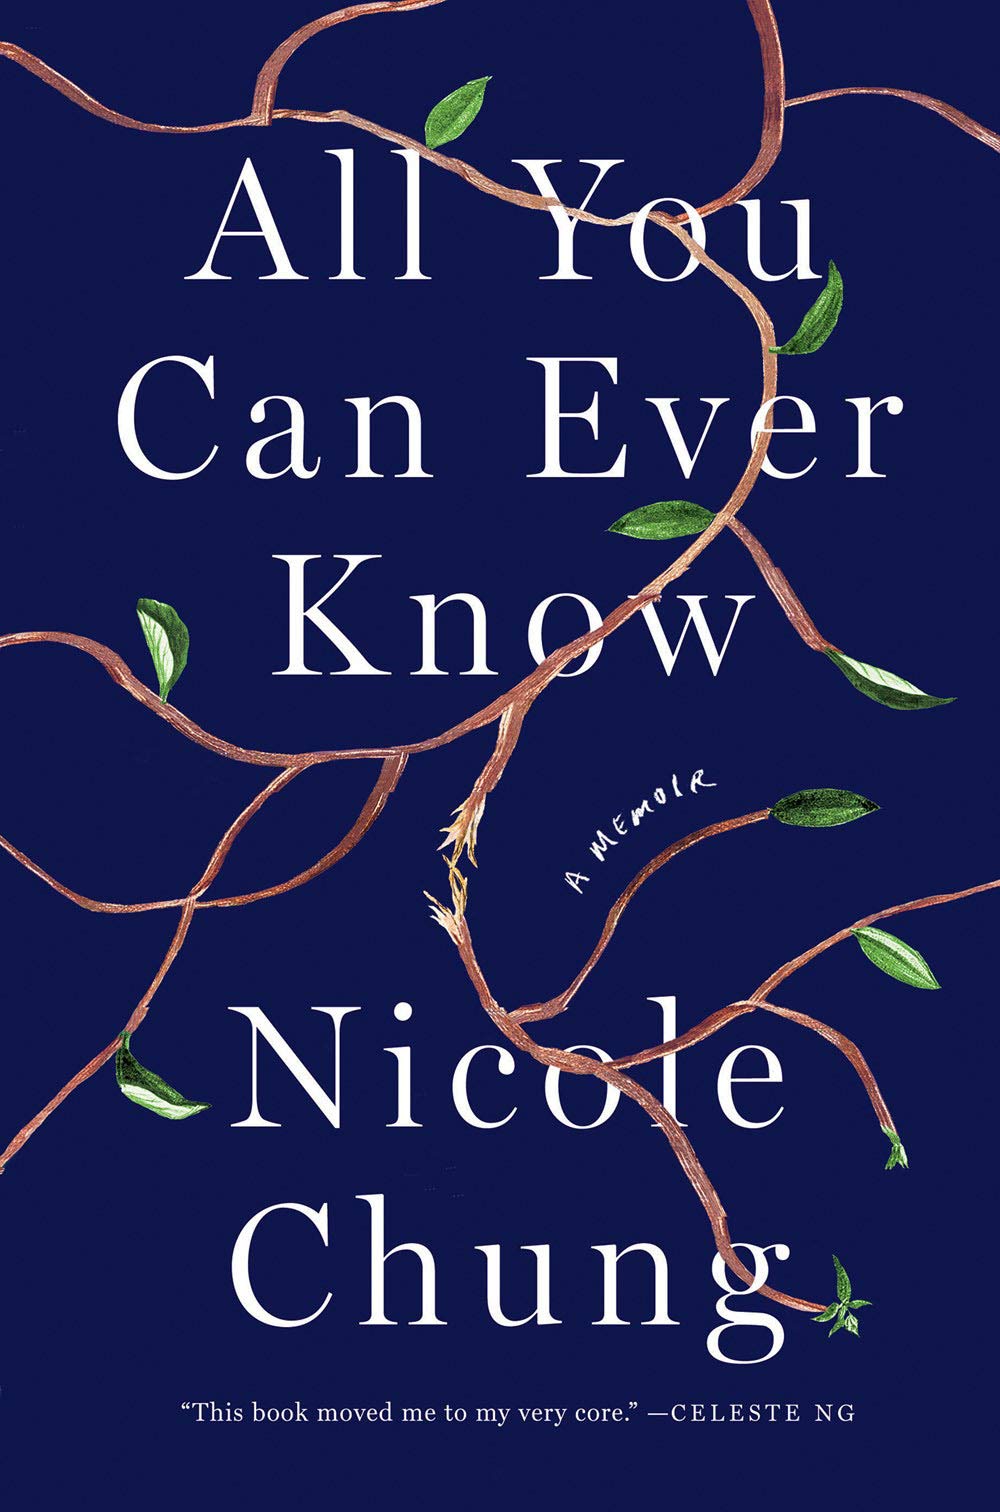 all you can ever know cover.jpg